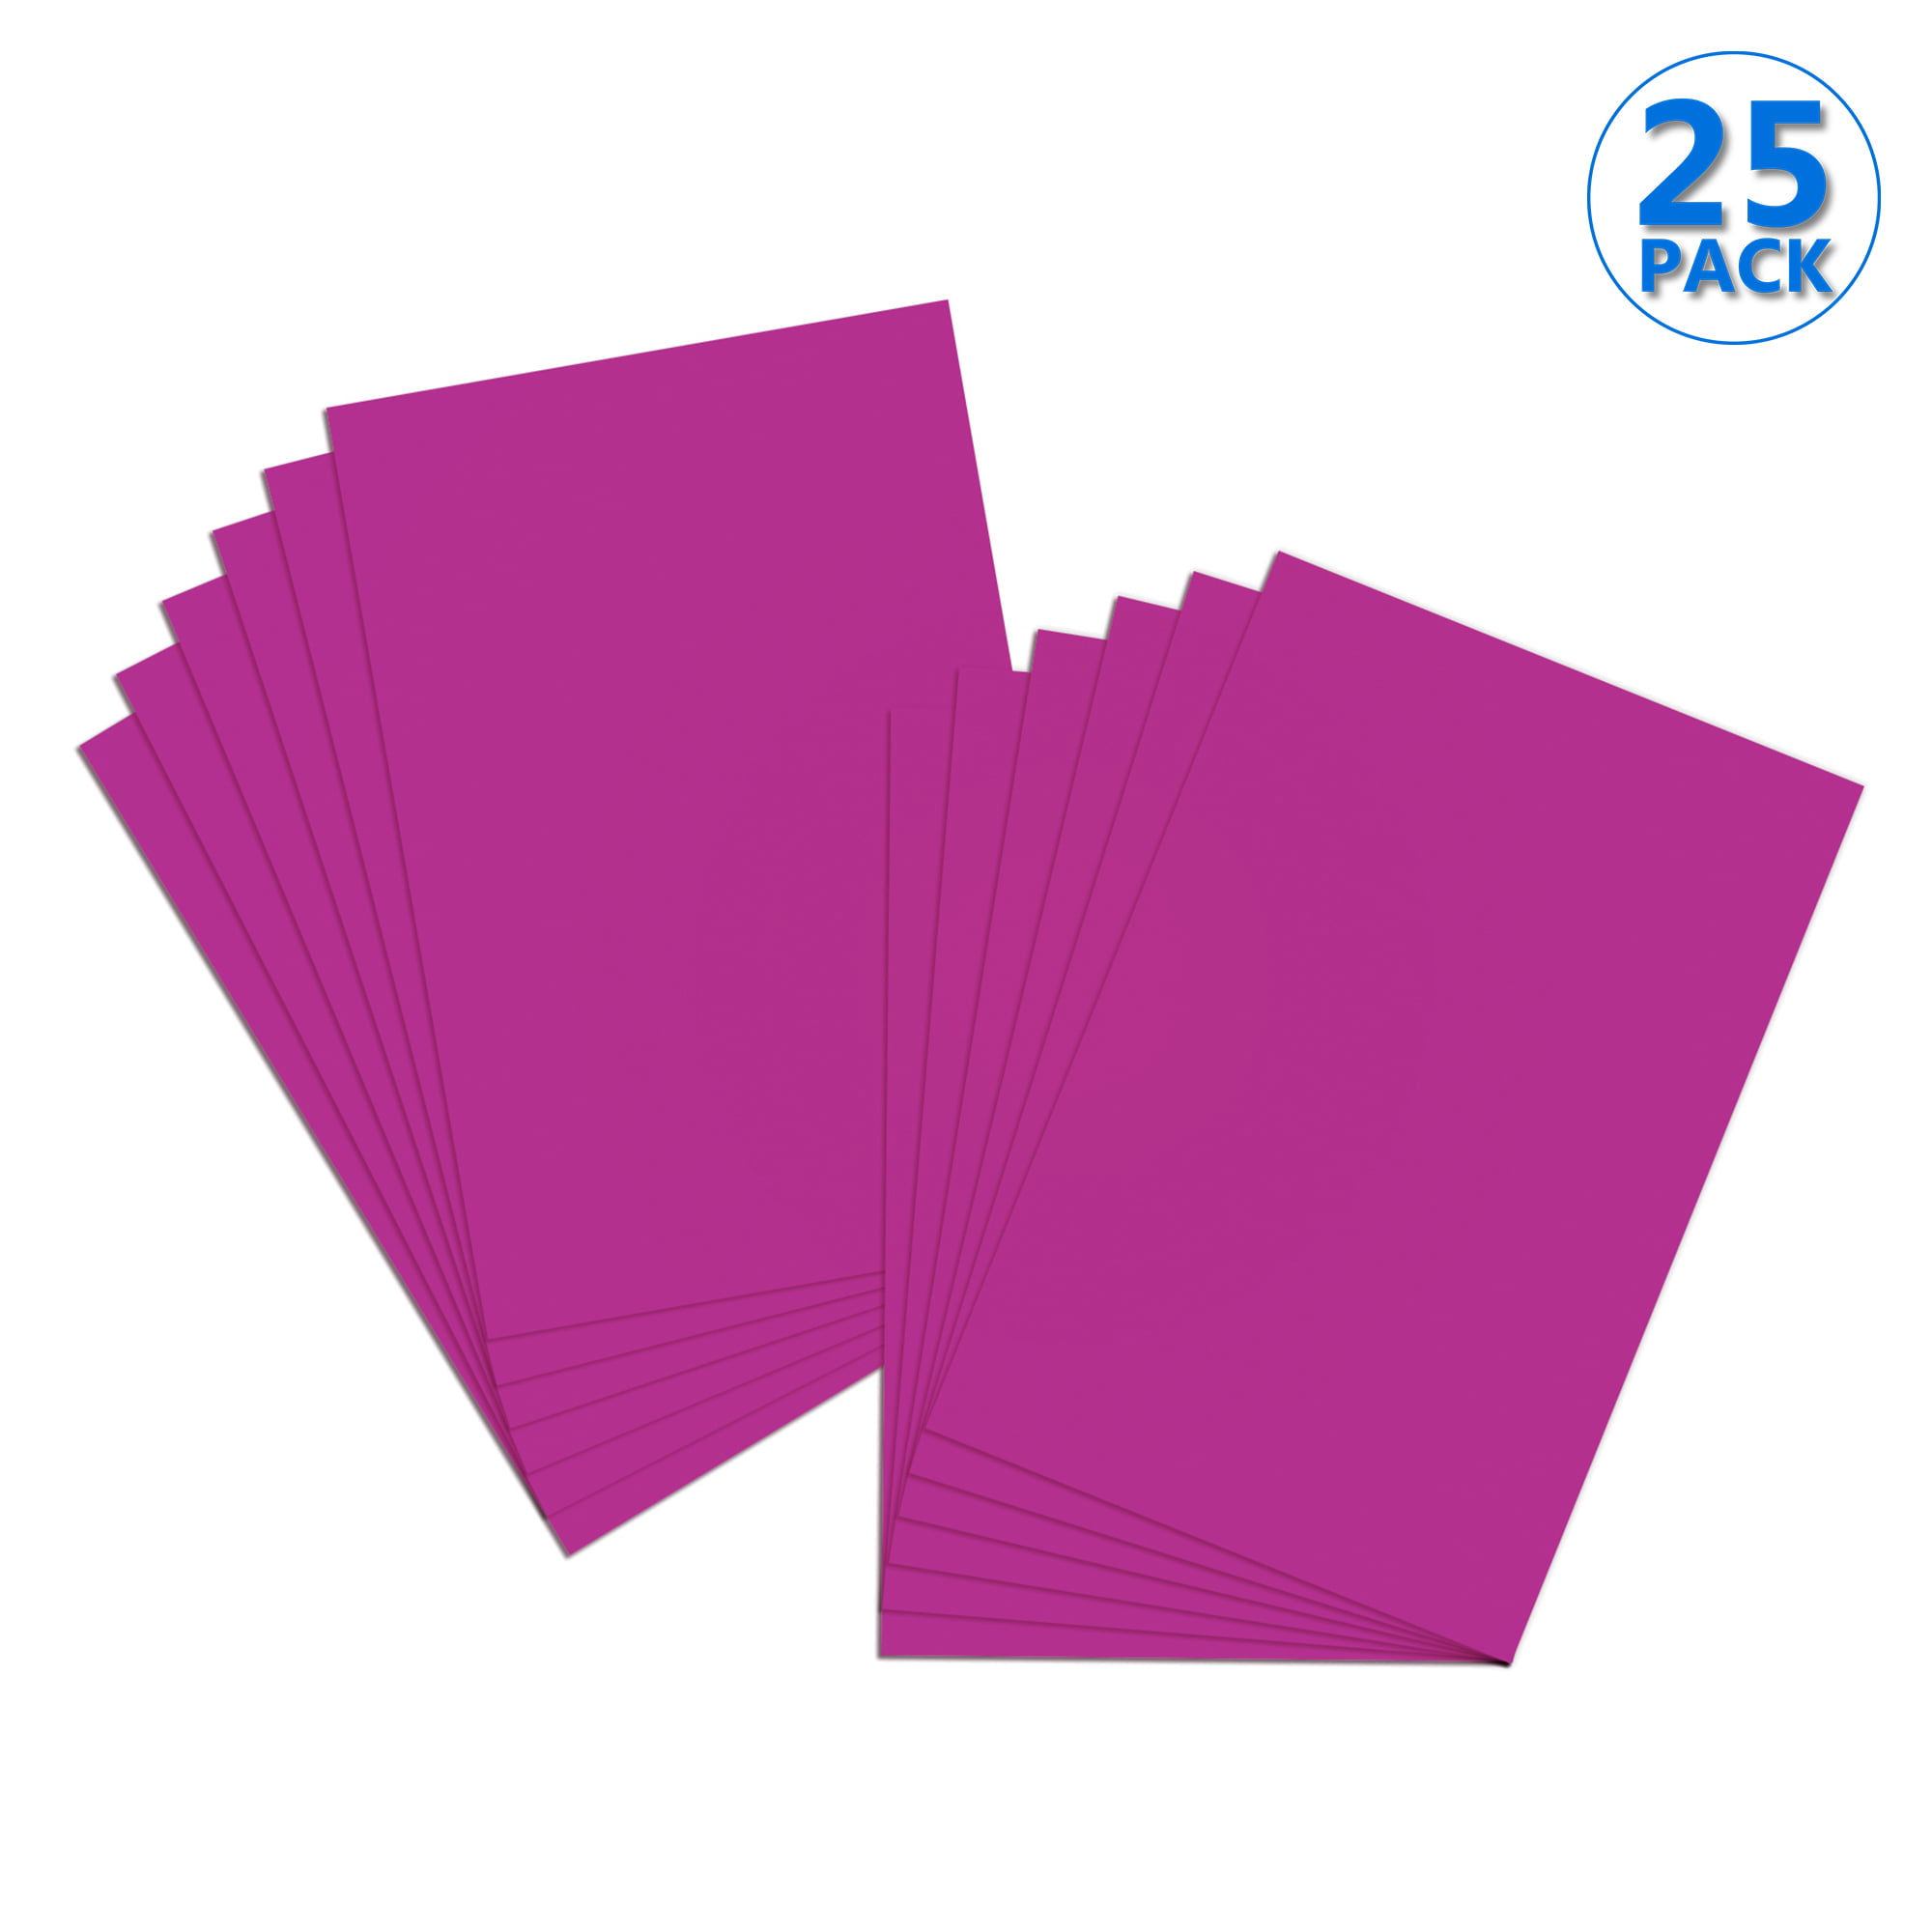 Emraw Poster Board Lightweight Craft Backing Boards for Presentations Office Sign Blank Painting Board Smooth Surface Poster Sheets for School Pack of 5 Magenta